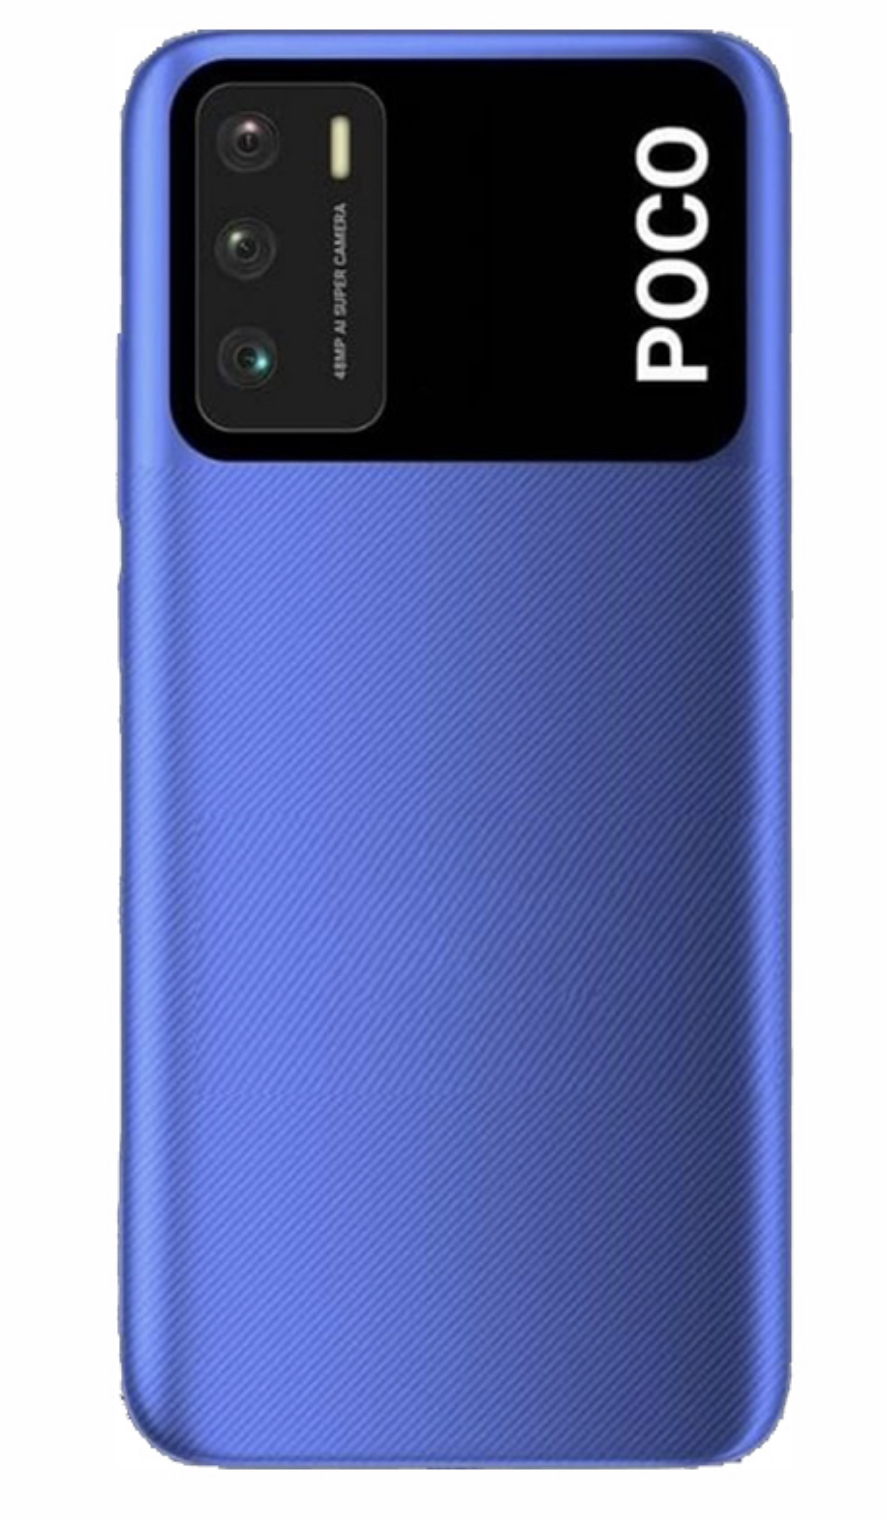 Xiaomi Poco M3 128GB Price in Pakistan and Specifications